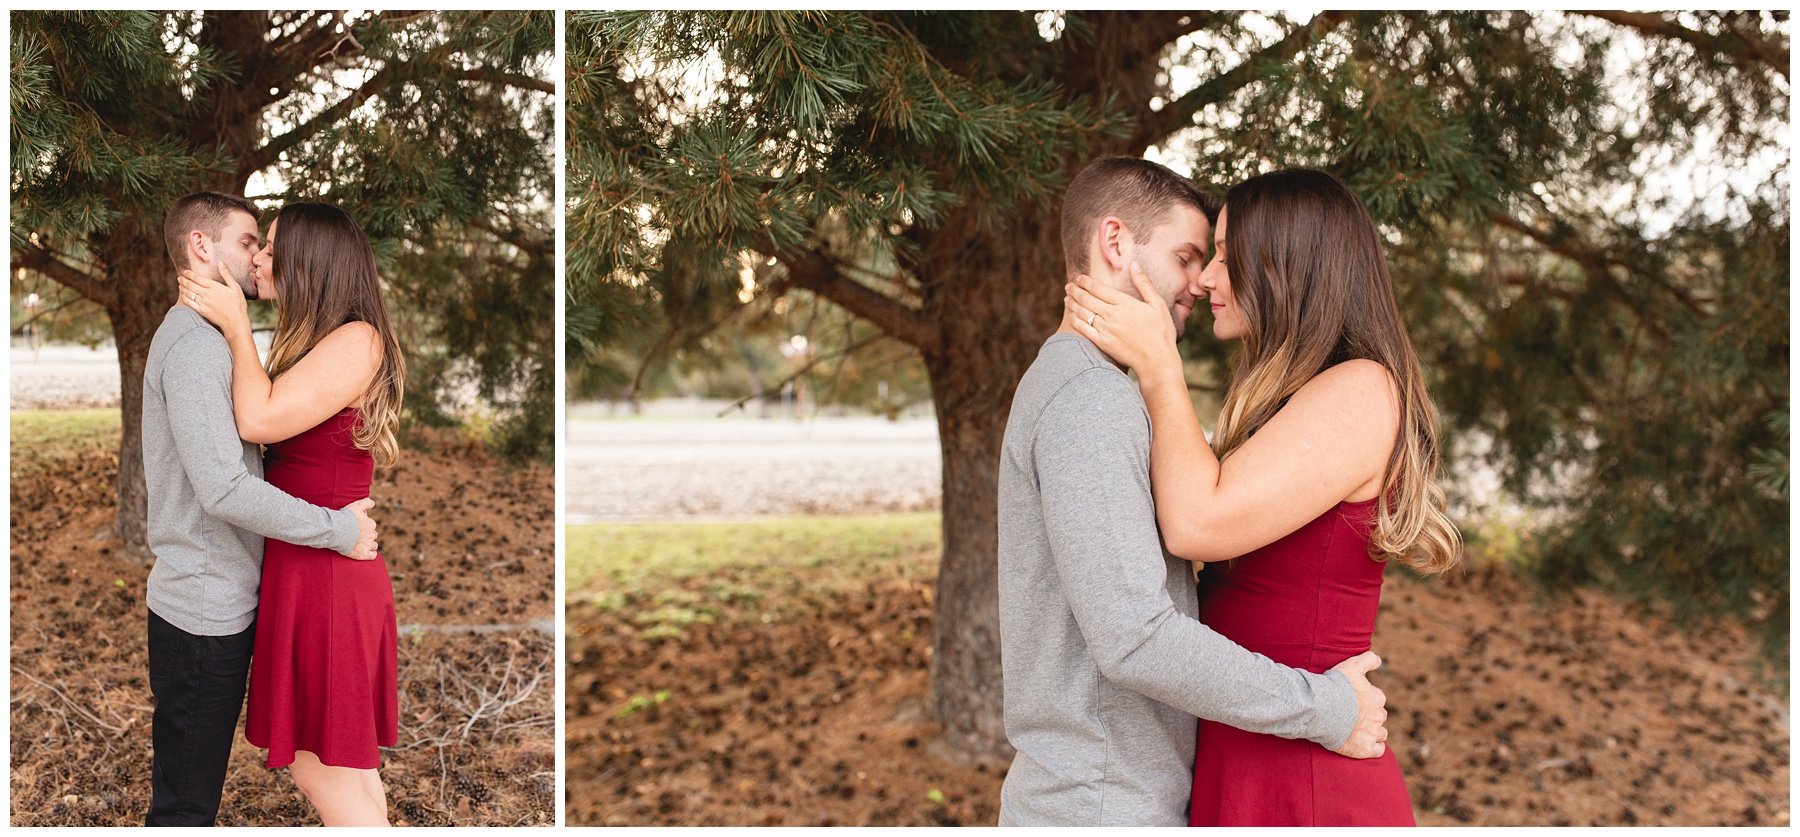 Natural light couples session in front of pine tree at sunset